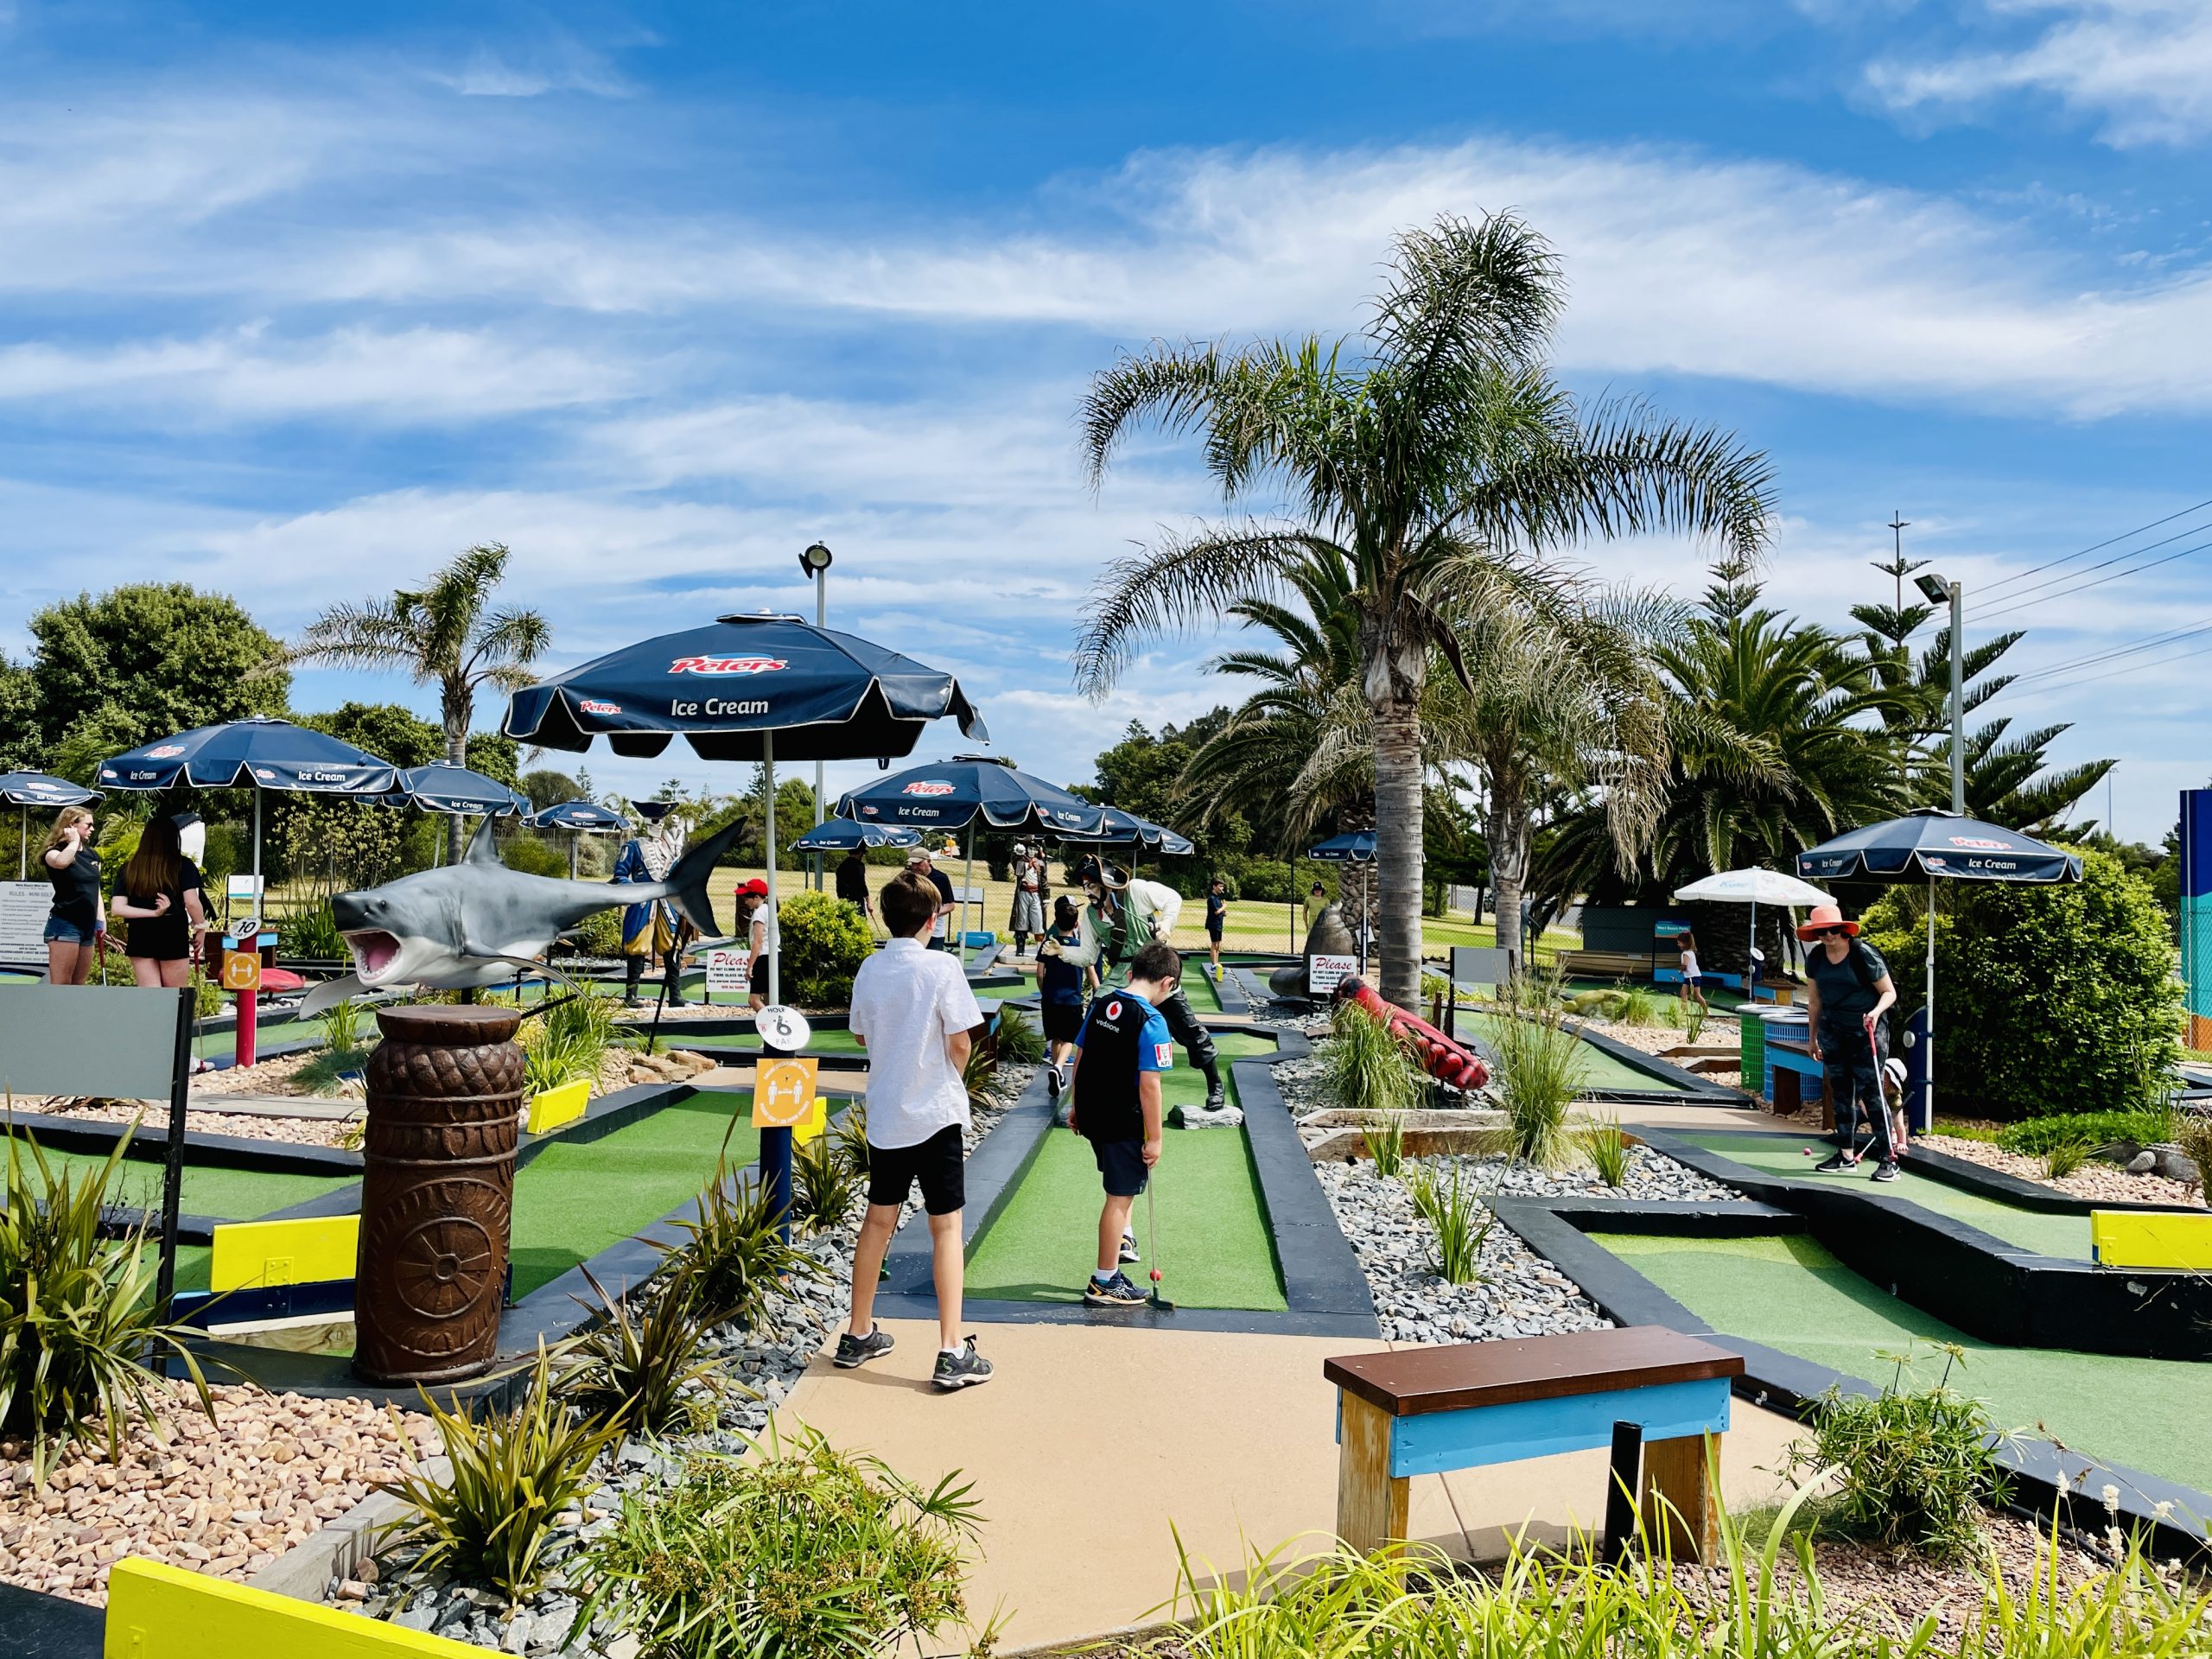 WIN one of five family passes for a game of mini golf at West Beach Mini Golf